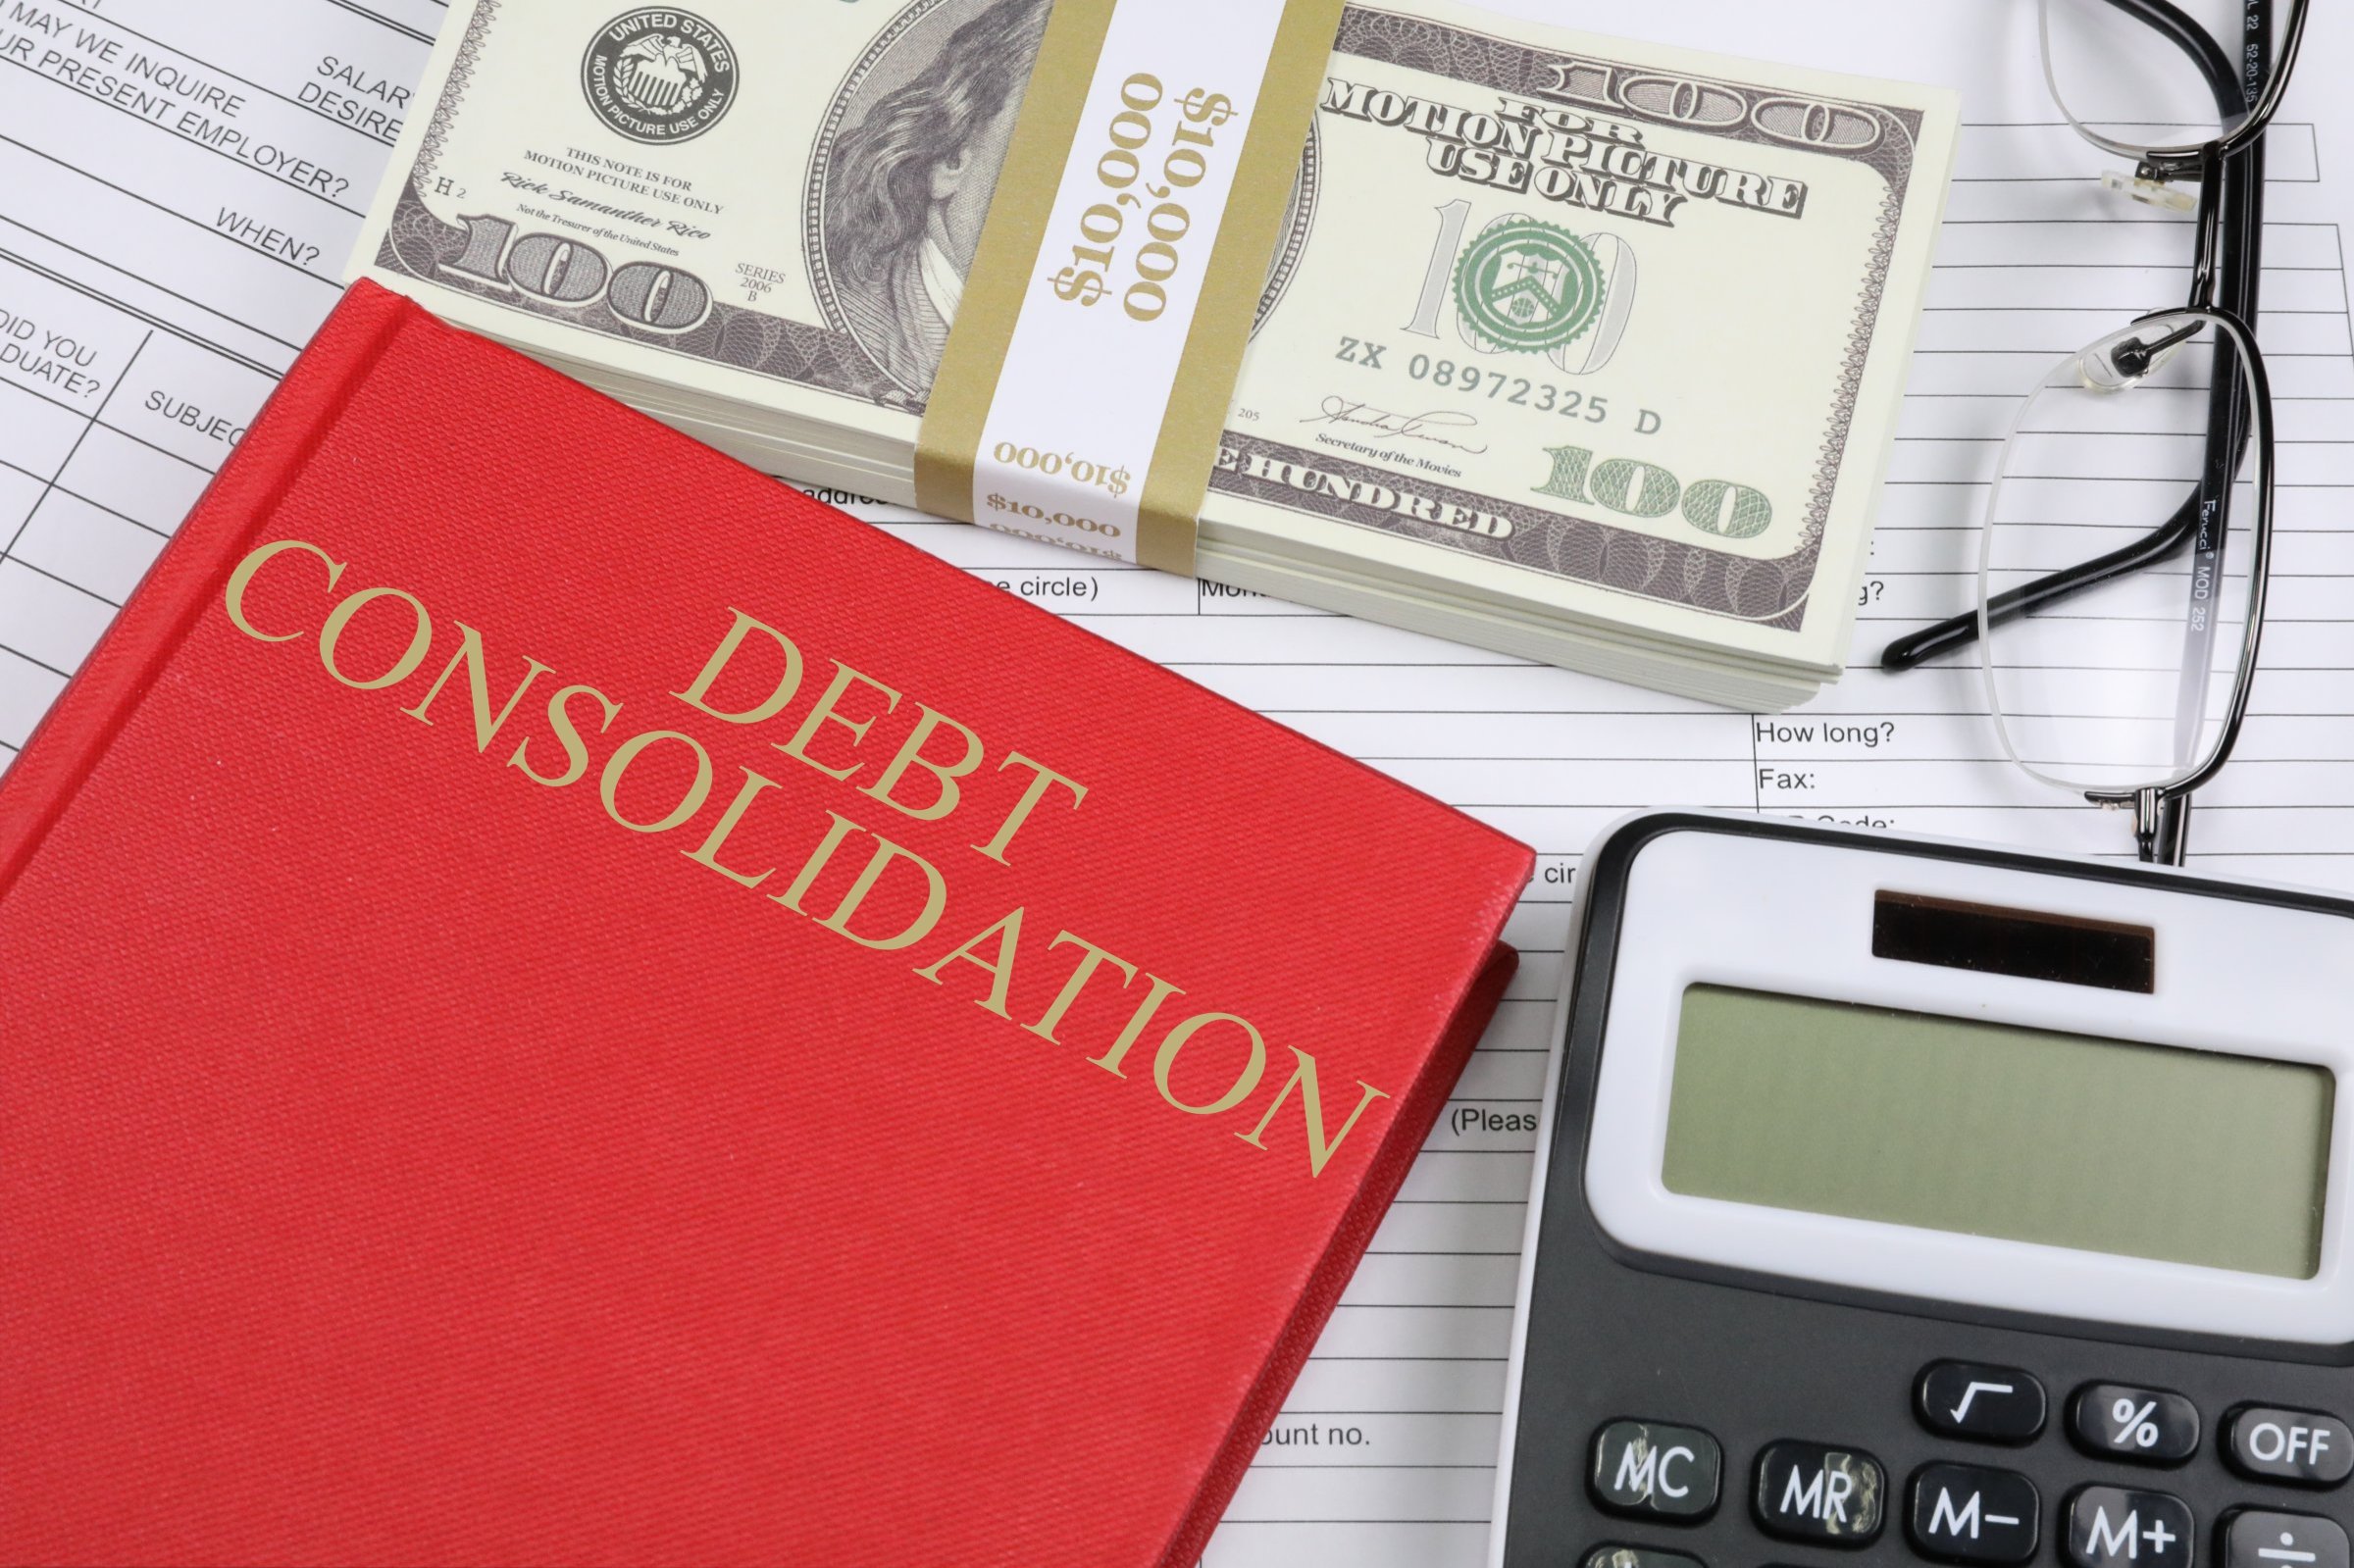 Debt Consolidation - Free of Charge Creative Commons Financial 8 image